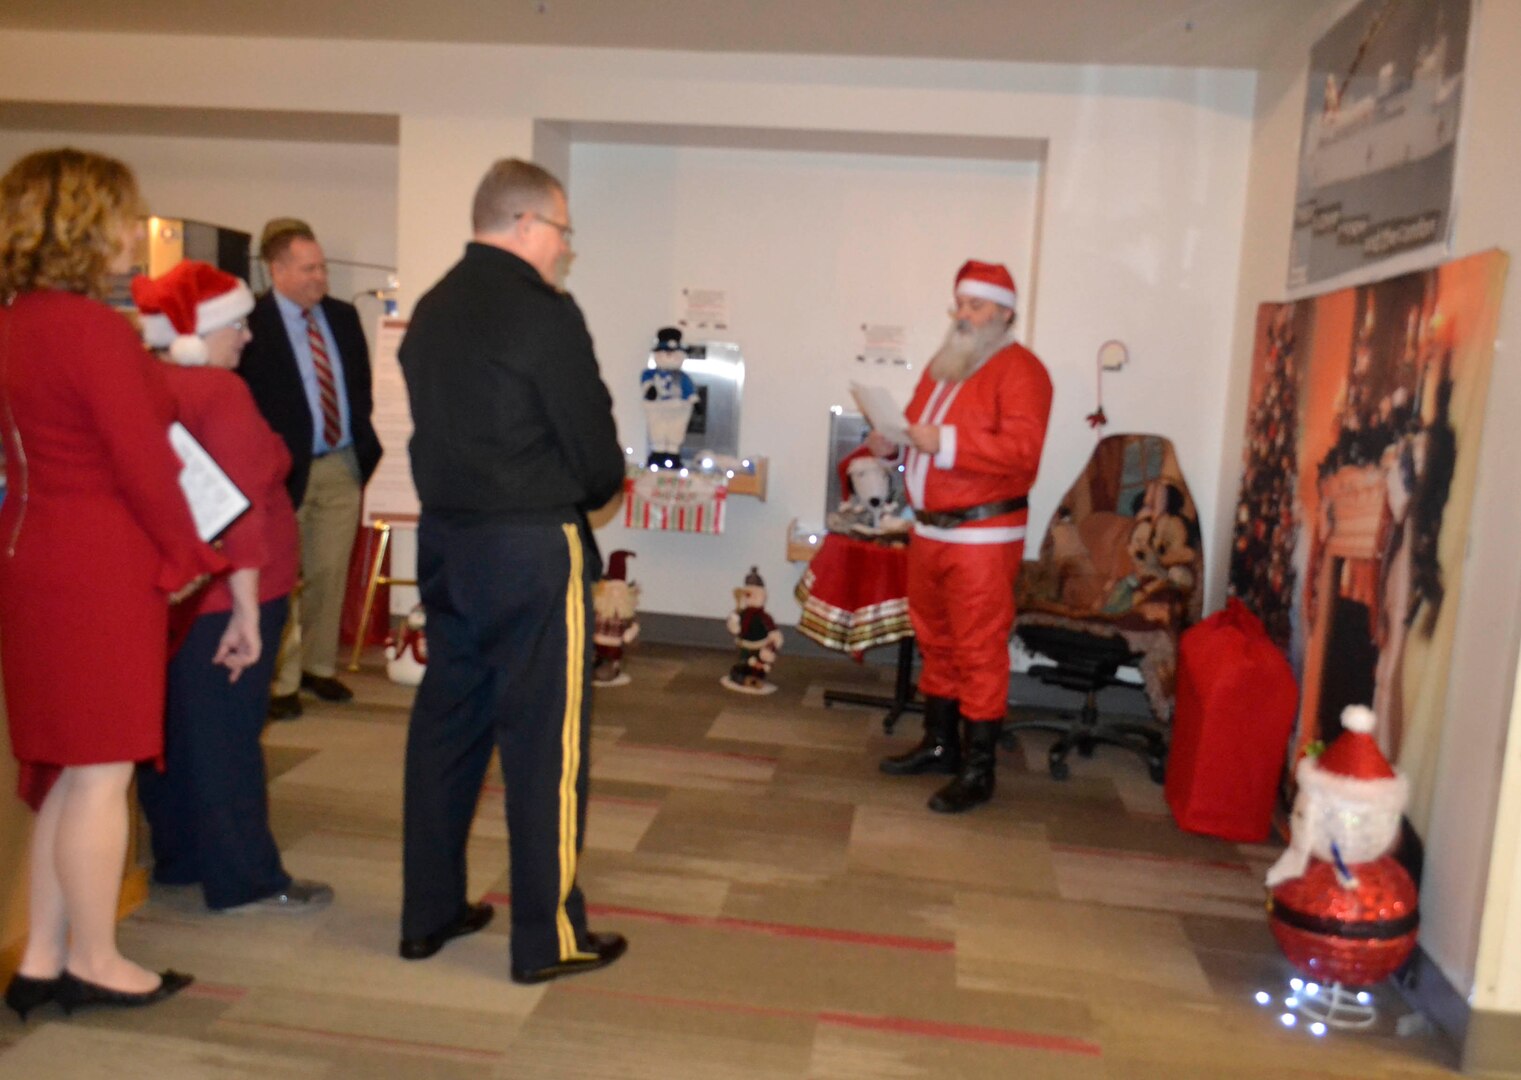 Defense Logistics Agency Troop Support leaders gather as they enjoy a reading from Santa as part of the Medical supply chain’s entry in the 2018 holiday decorating contest in Philadelphia Dec. 20, 2018.